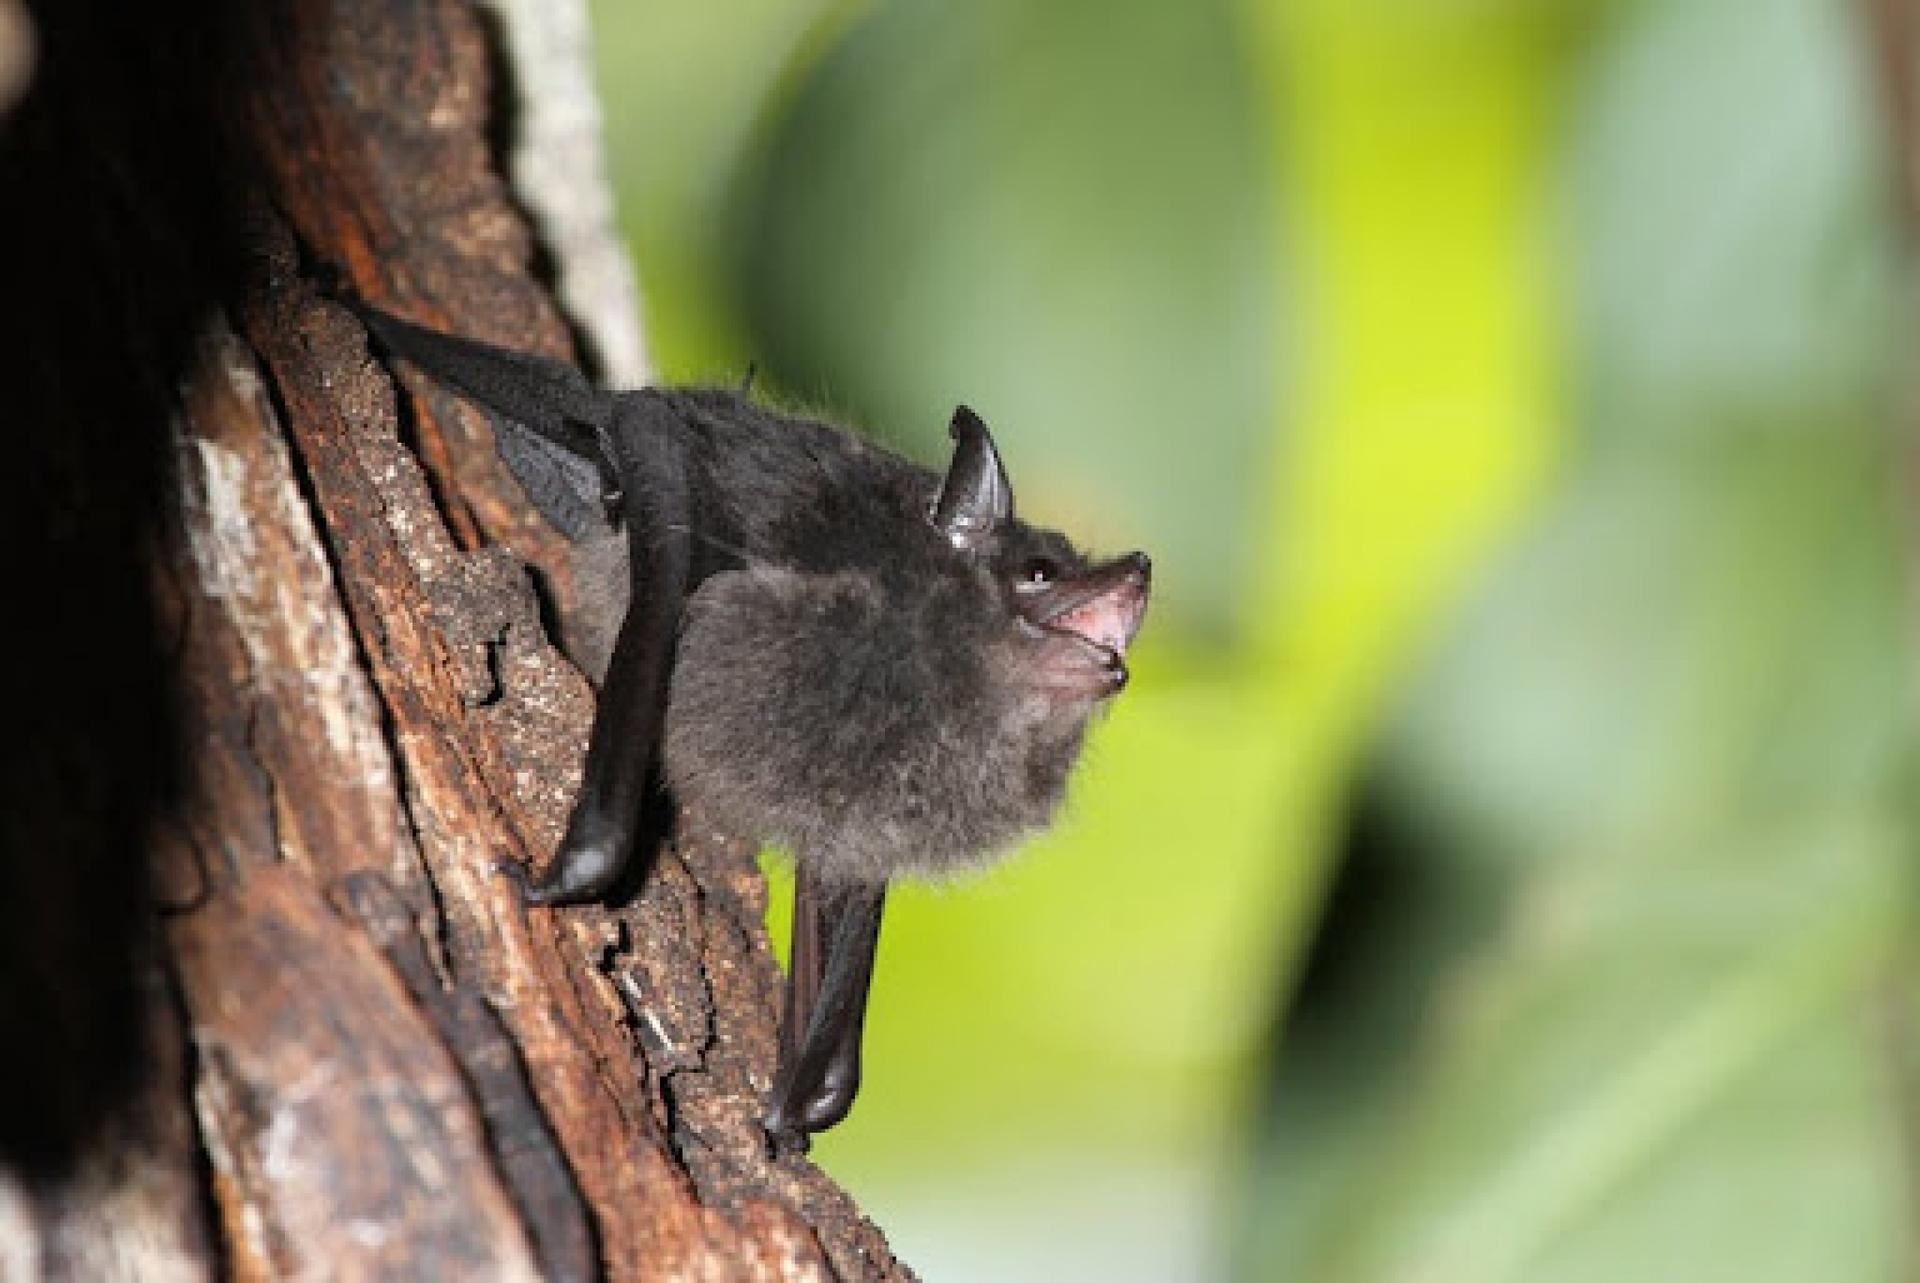 A greater sac-winged bat pup babbling in its day roost.